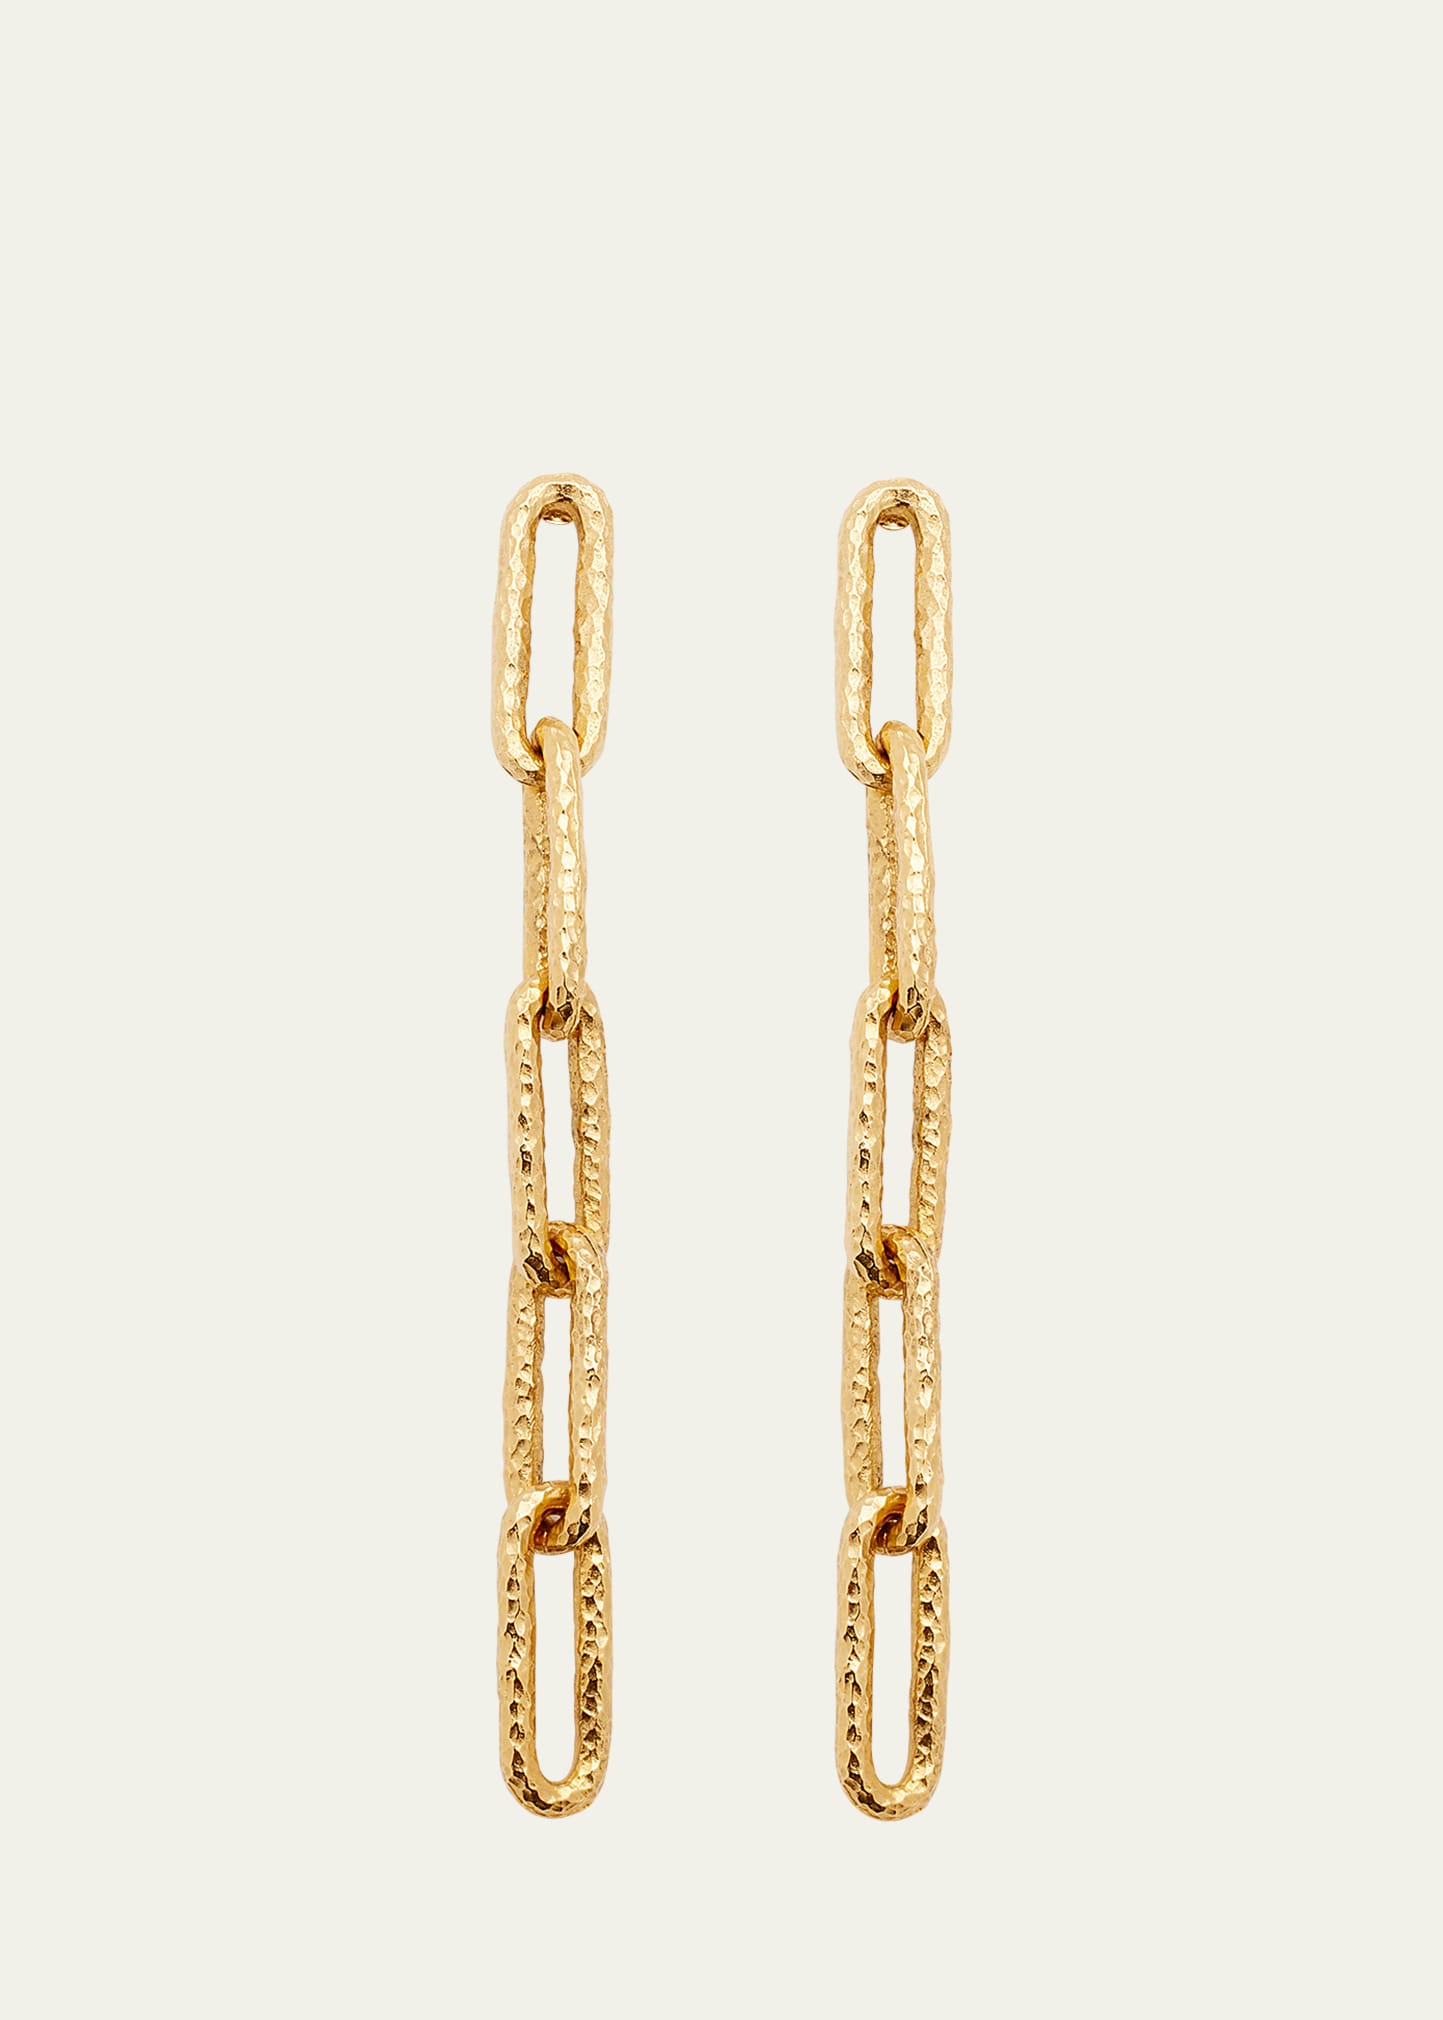 24K Yellow Gold Hammered Link Post Earrings